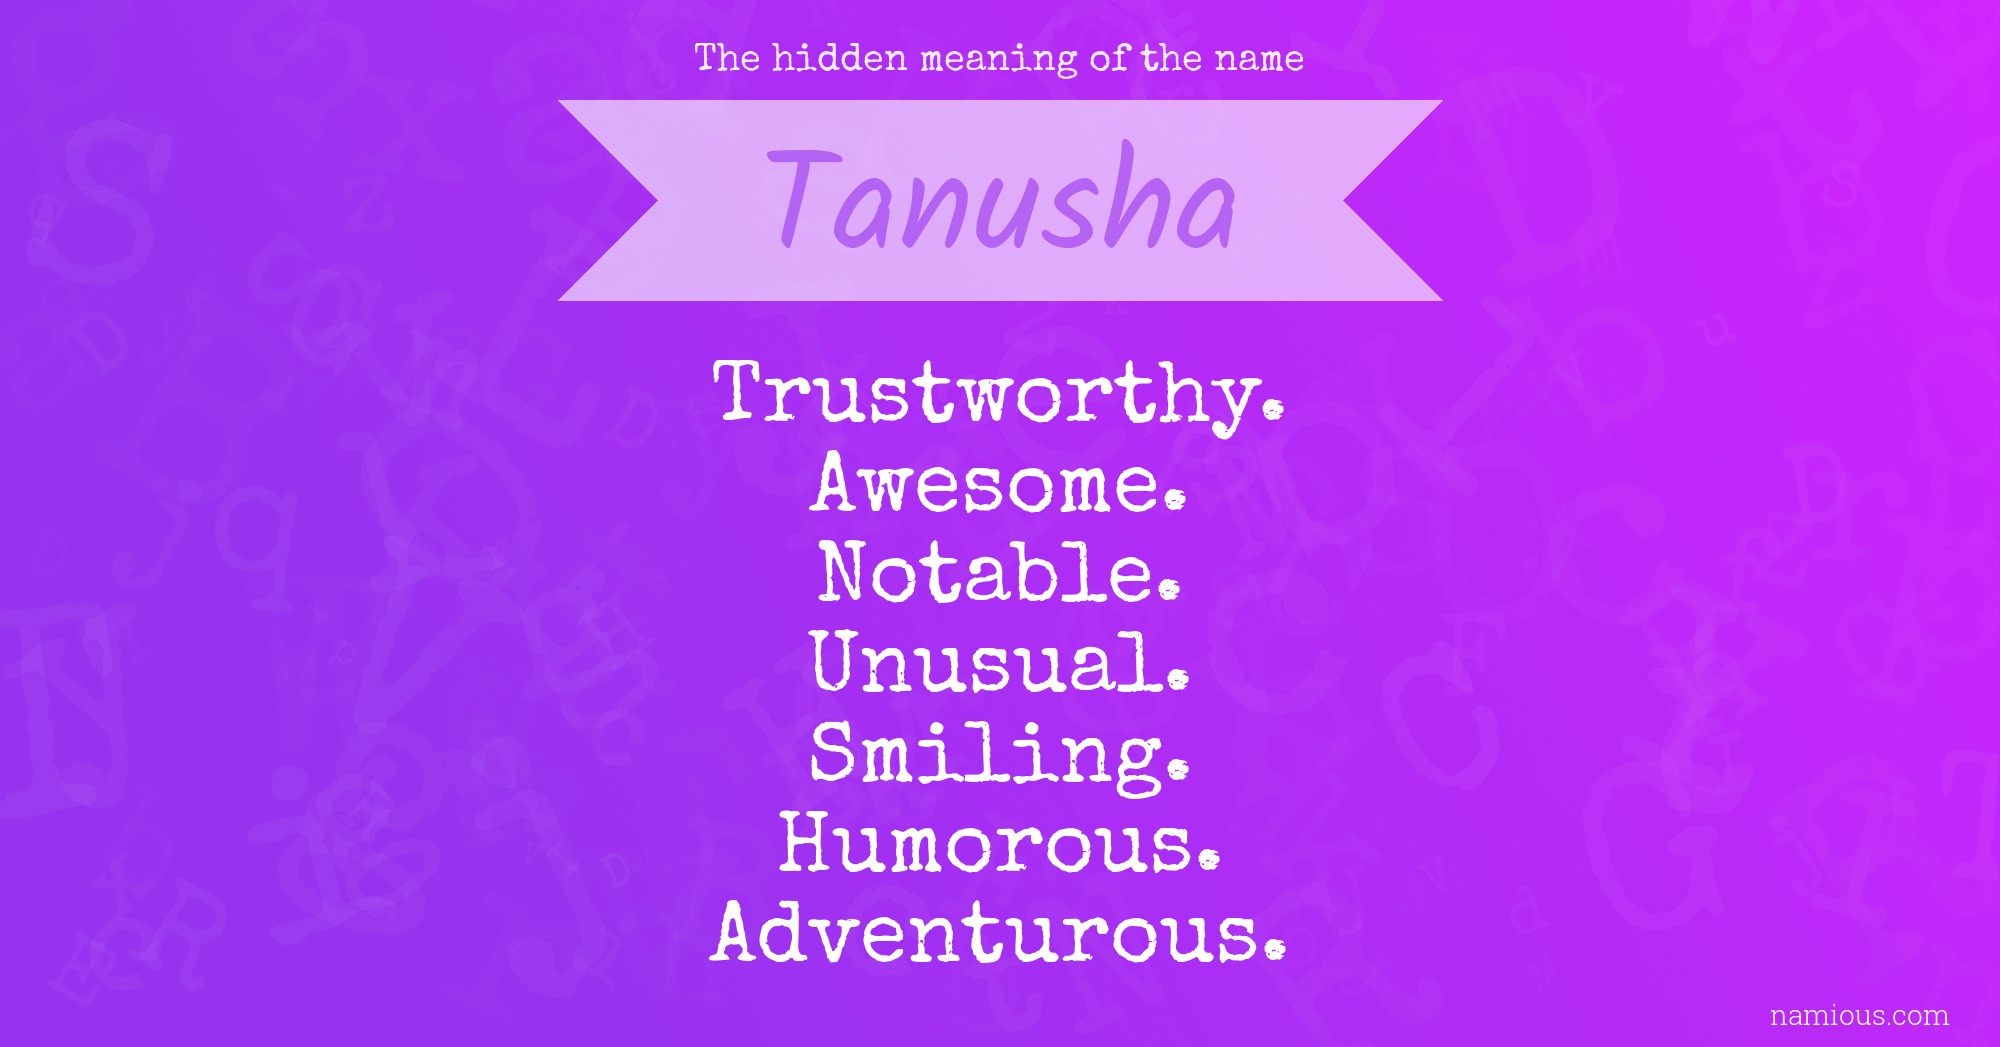 The hidden meaning of the name Tanusha